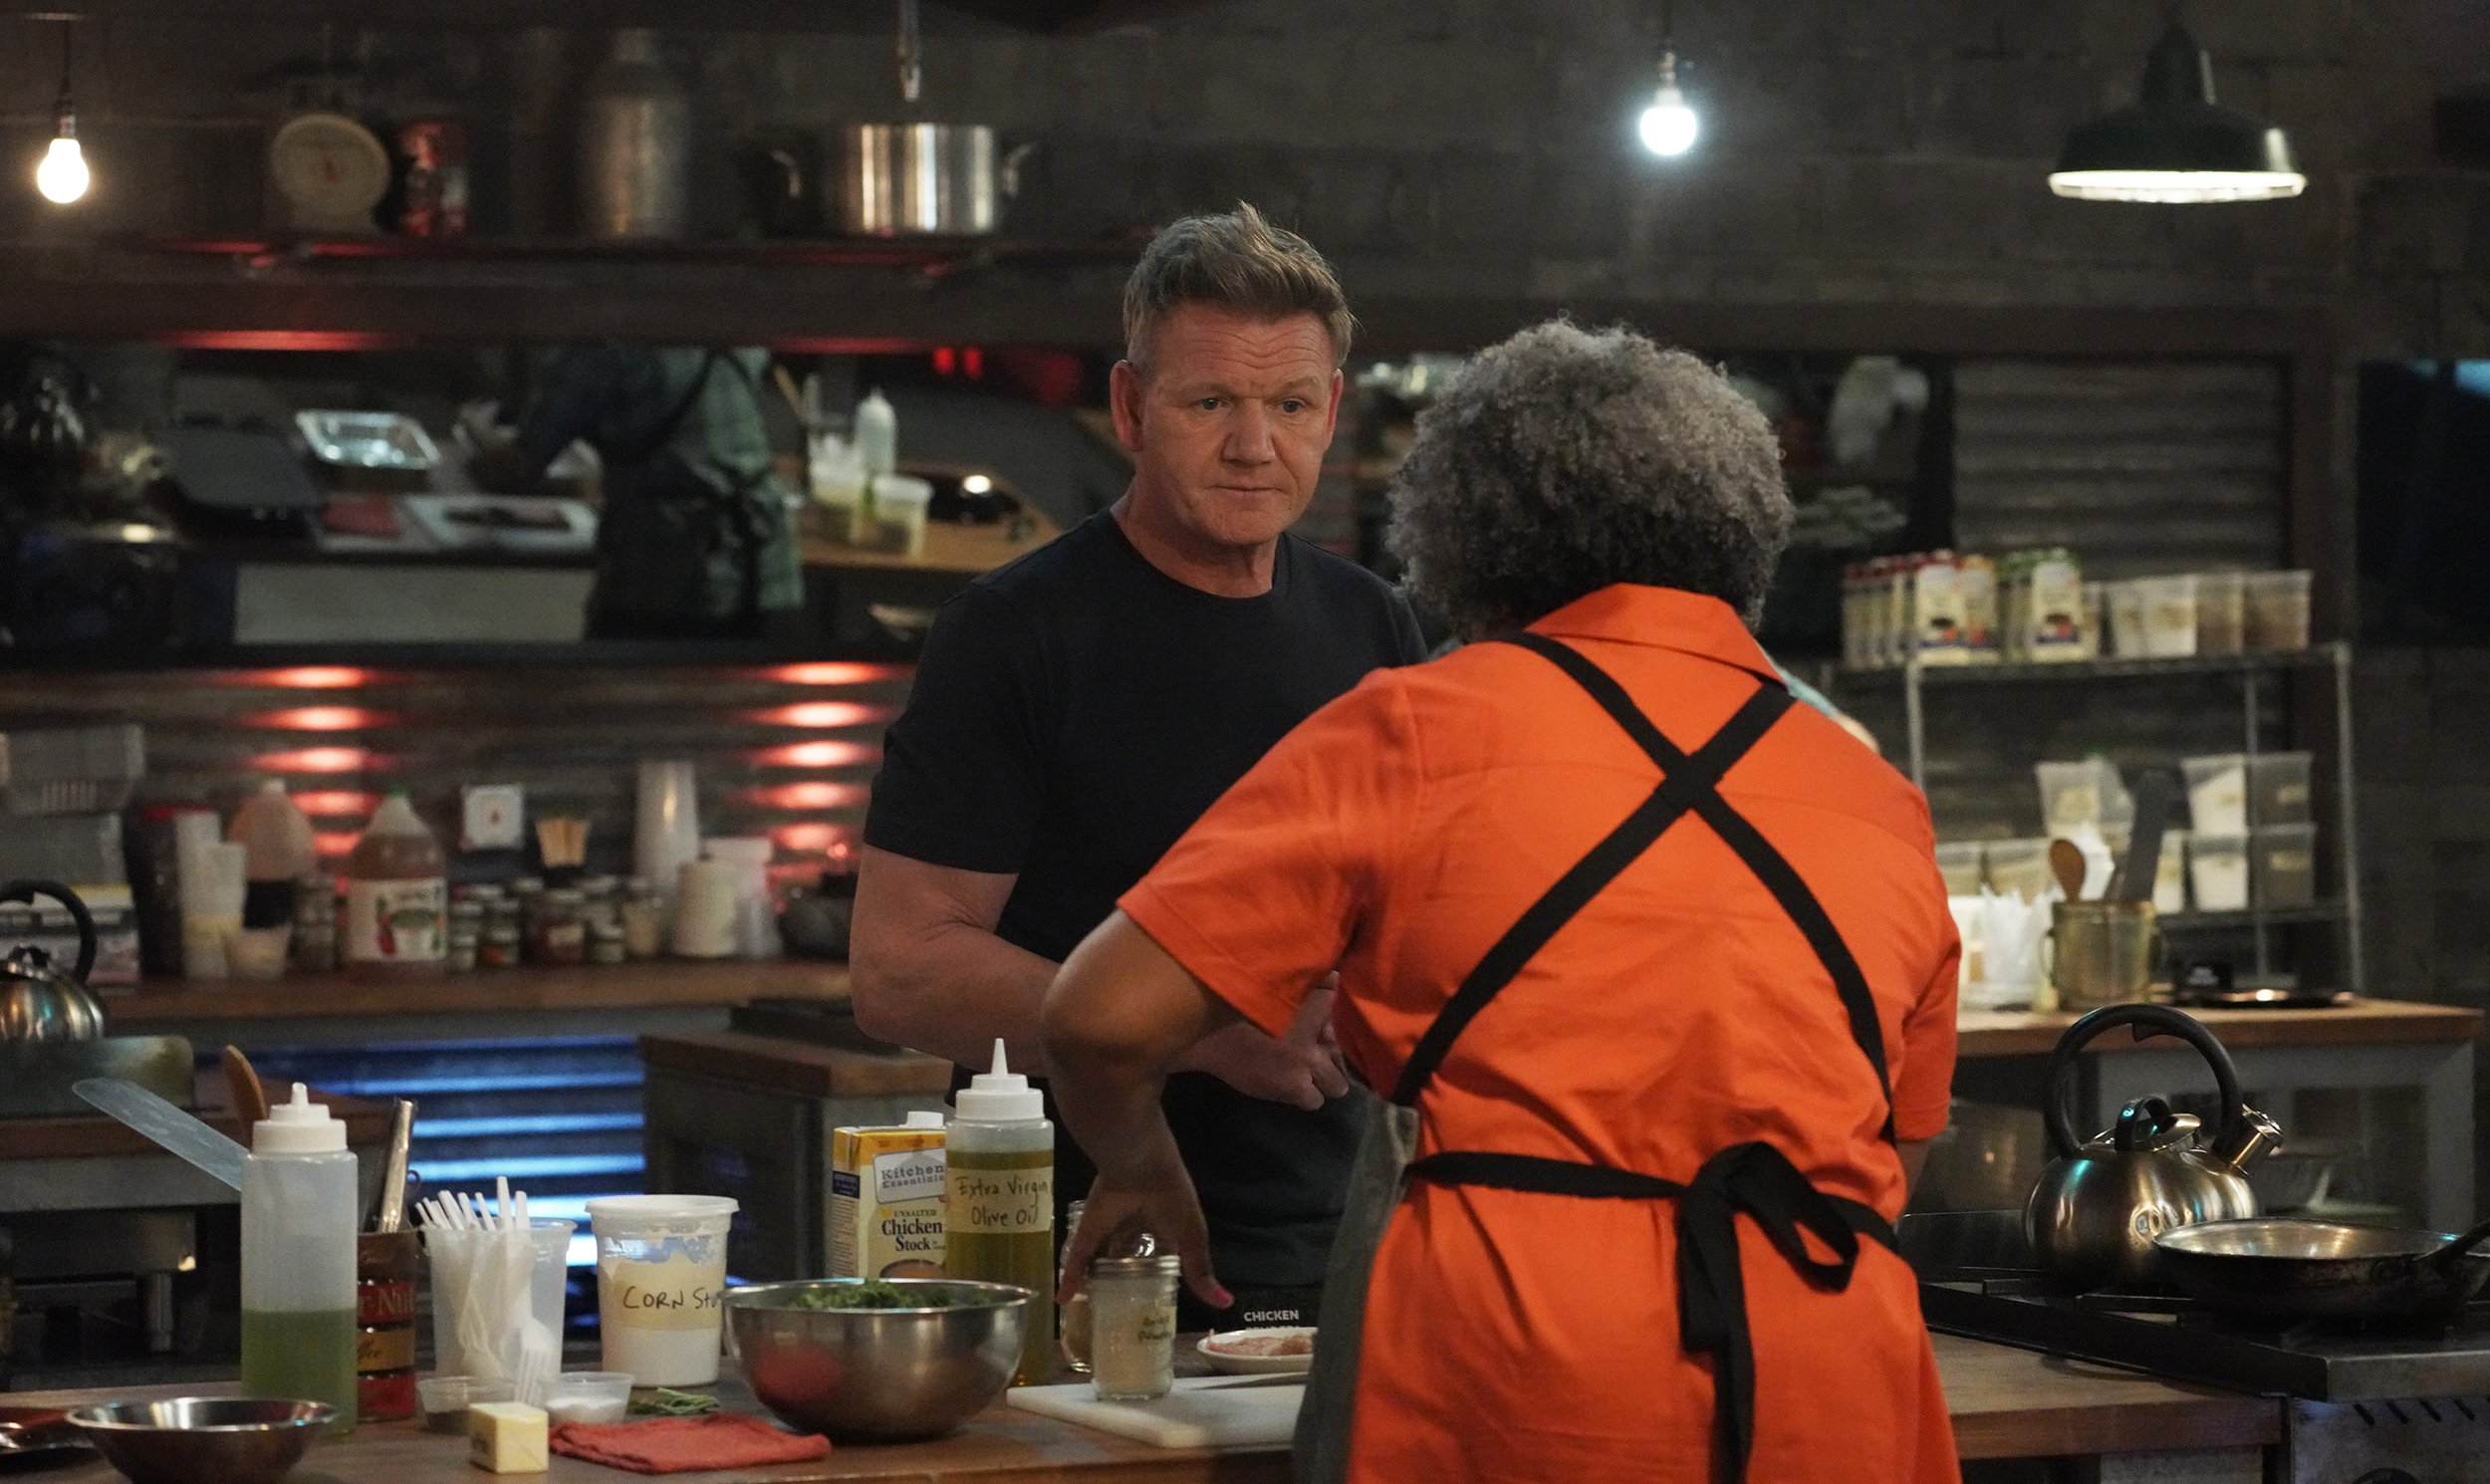  NEXT LEVEL CHEF: L-R: Gordon Ramsay with contestant Courtney Brown in the ÒWelcome To The Next LevelÓ series premiere episode of NEXT LEVEL CHEF airing Sunday, Jan(8:00-9:00 ET/PT) on FOX © 2022 FOX Media LLC. CR: FOX. 